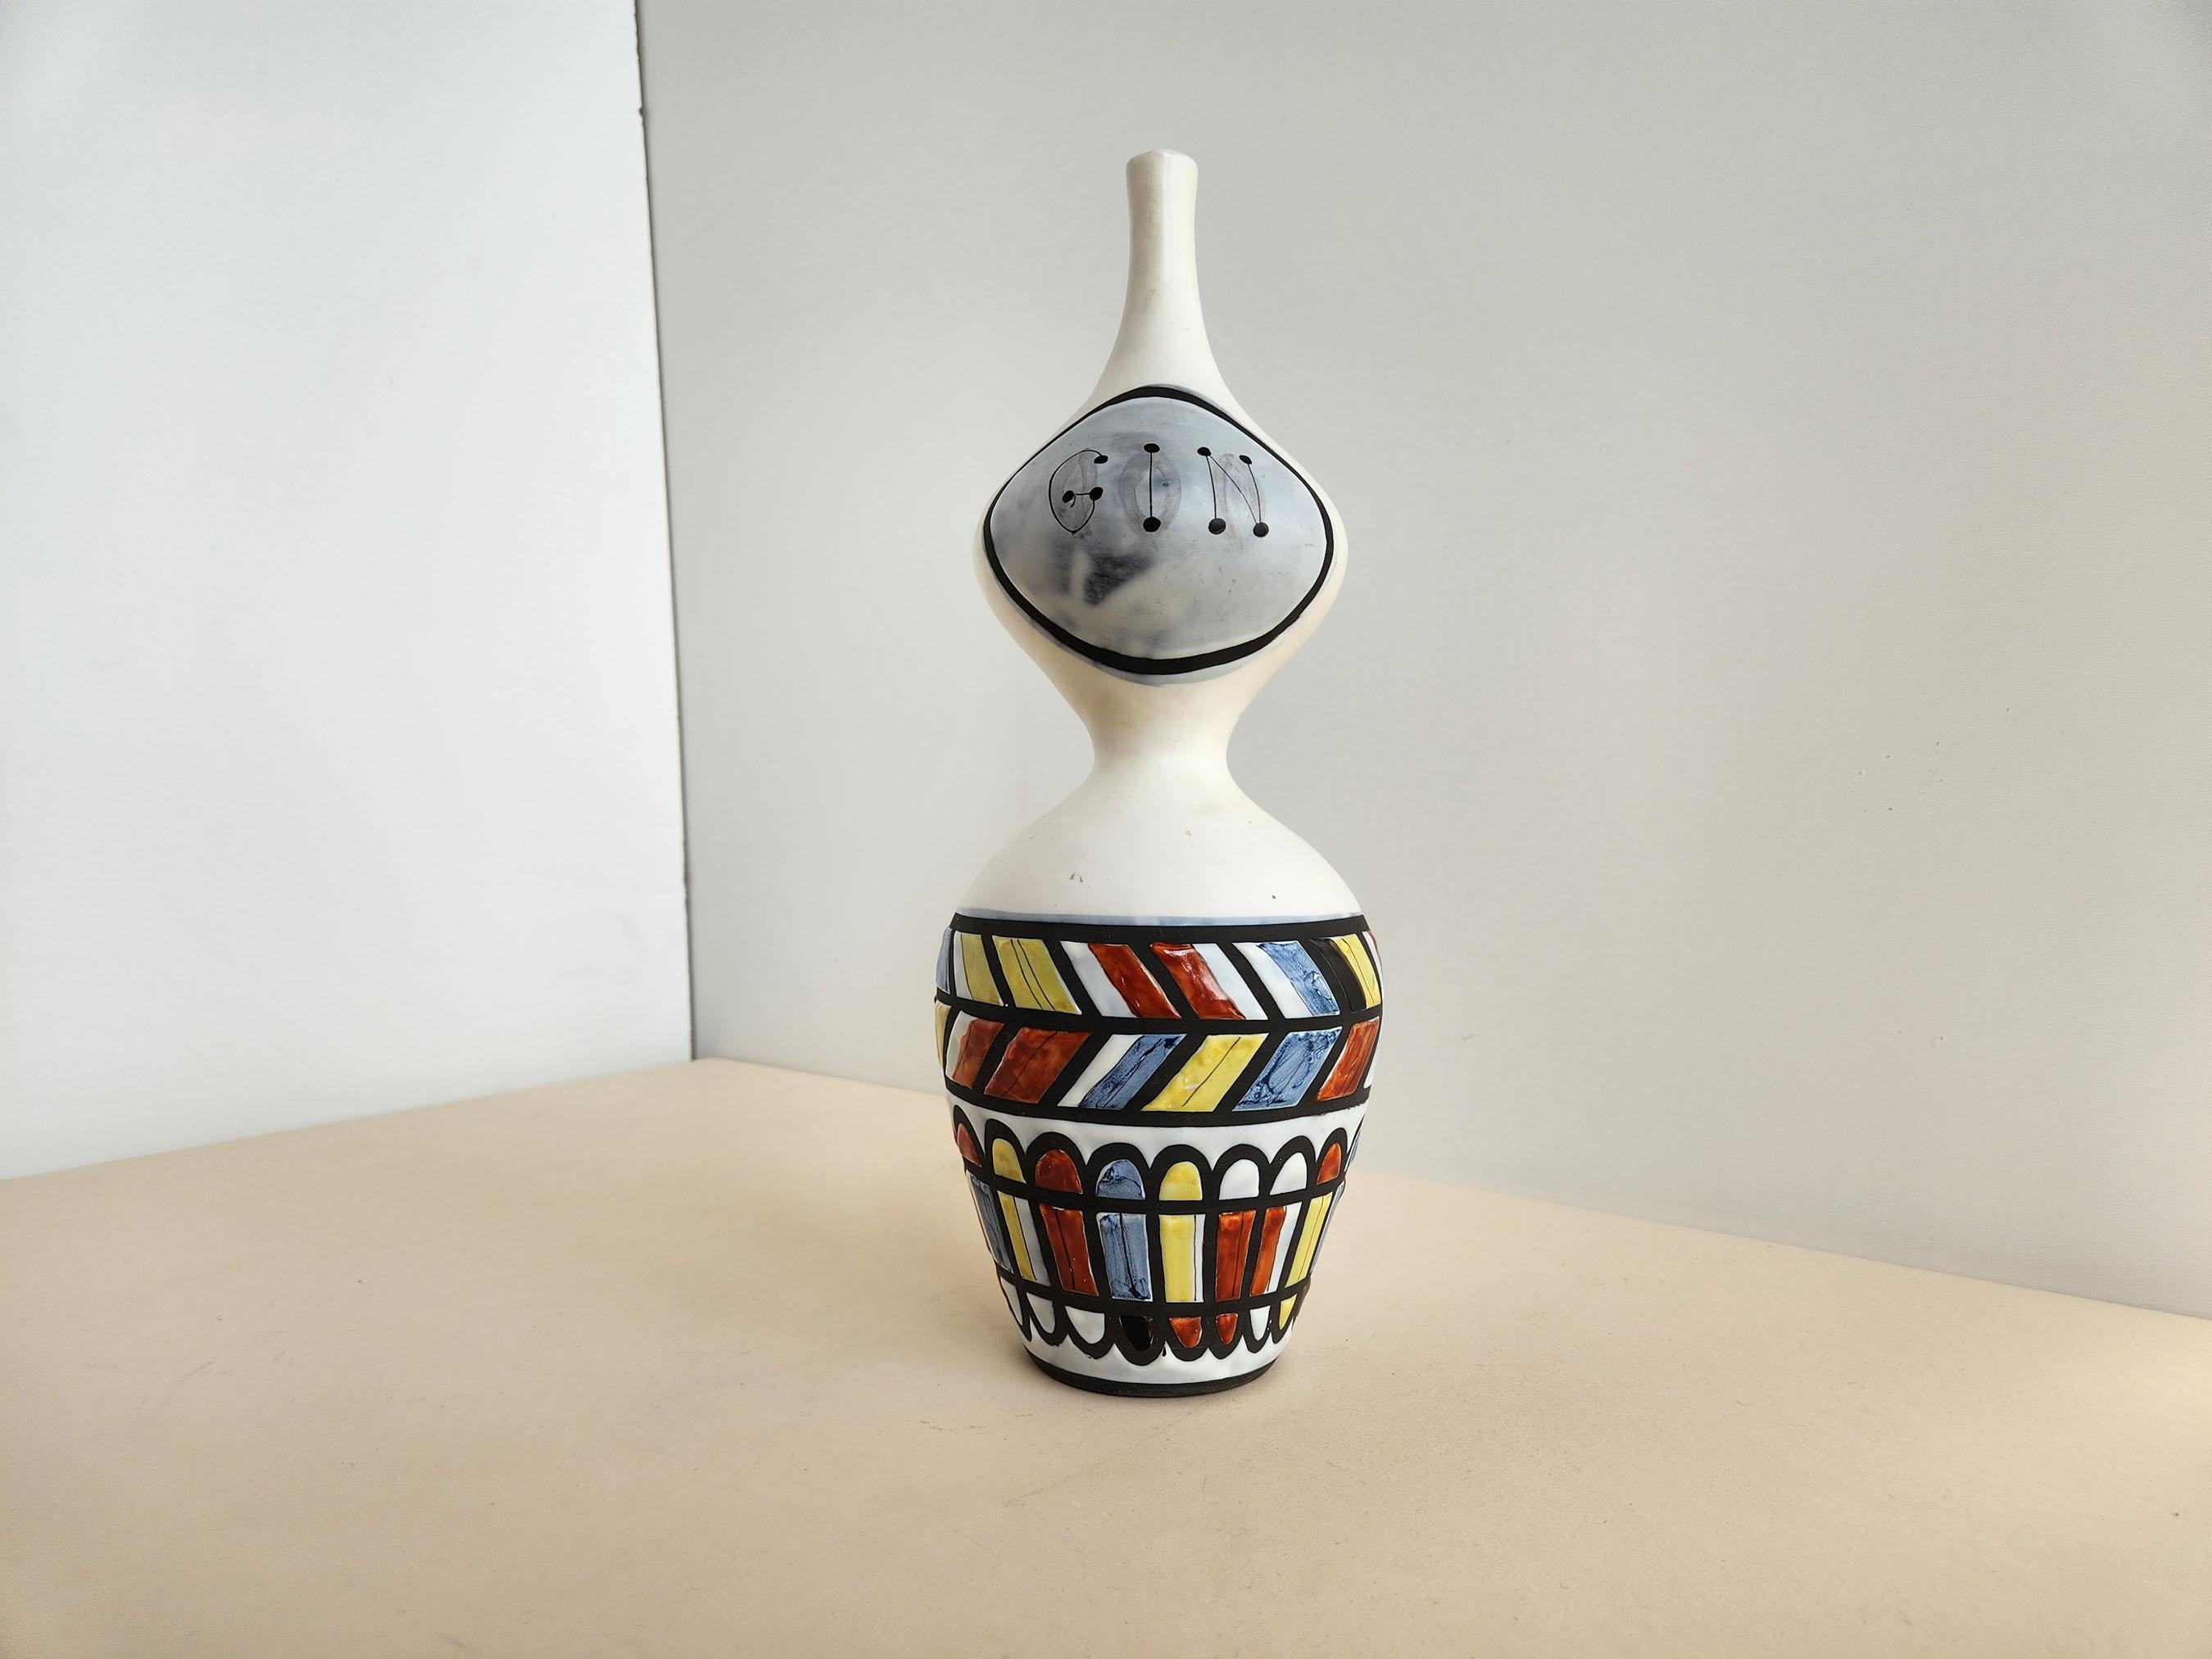 Vintage ceramic decorative flask signed by Roger Capron - Vallauris, France

Roger Capron was in influential French ceramicist, known for his tiled tables and his use of recurring motifs such as stylized branches and geometrical suns.   He was born